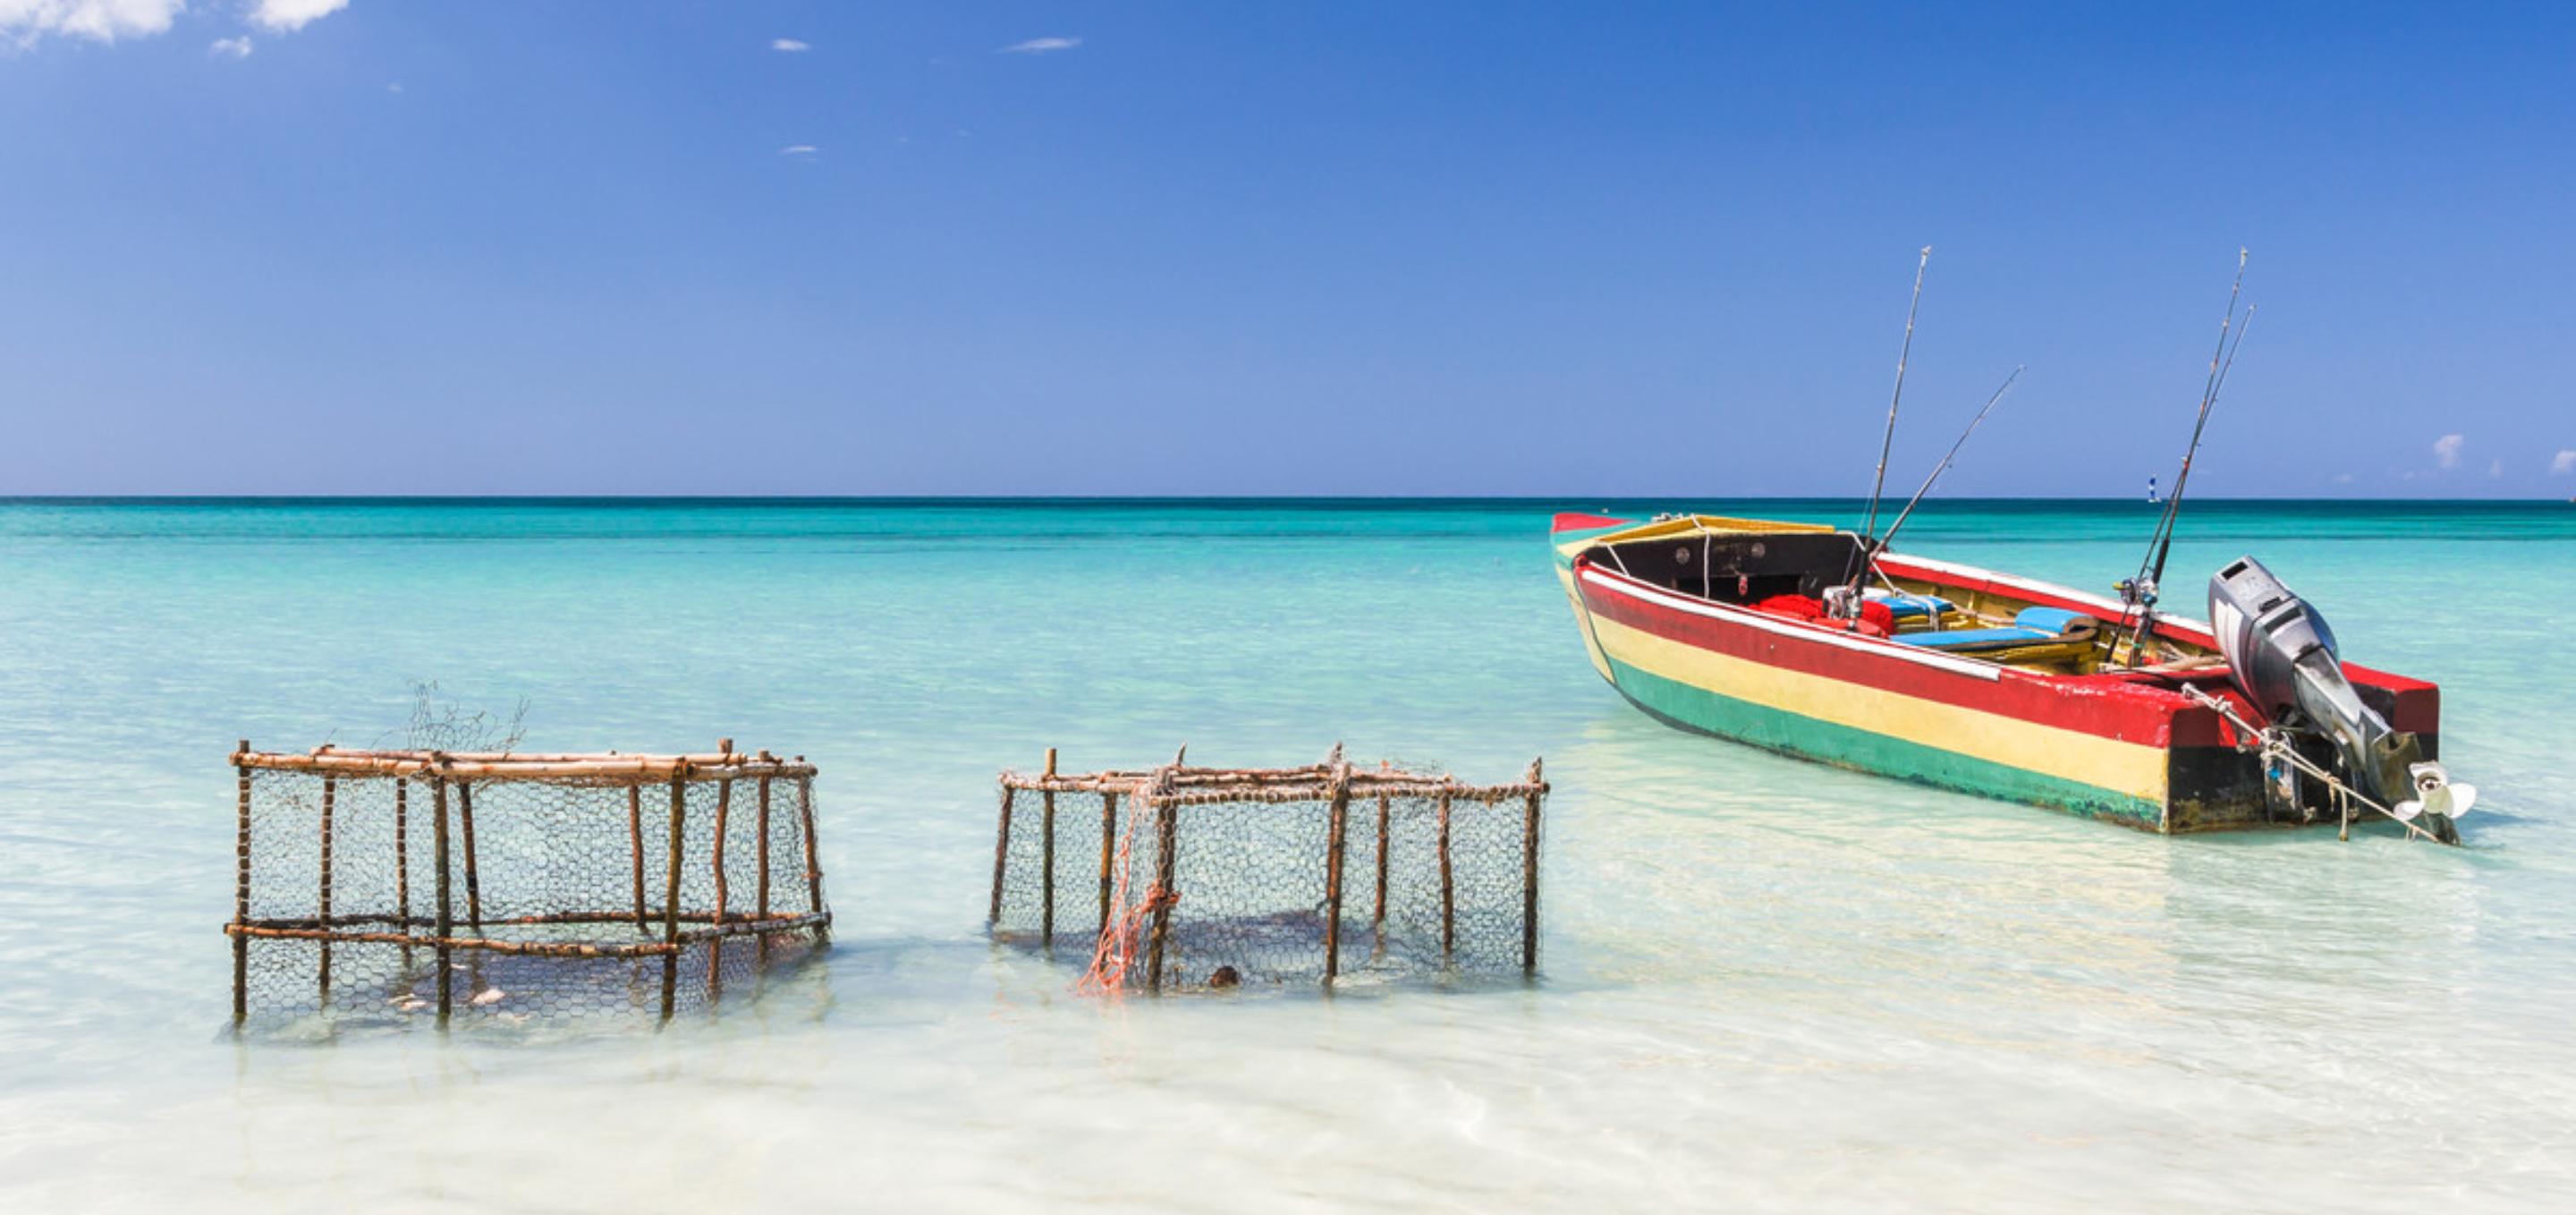 An image of a boat on the shore